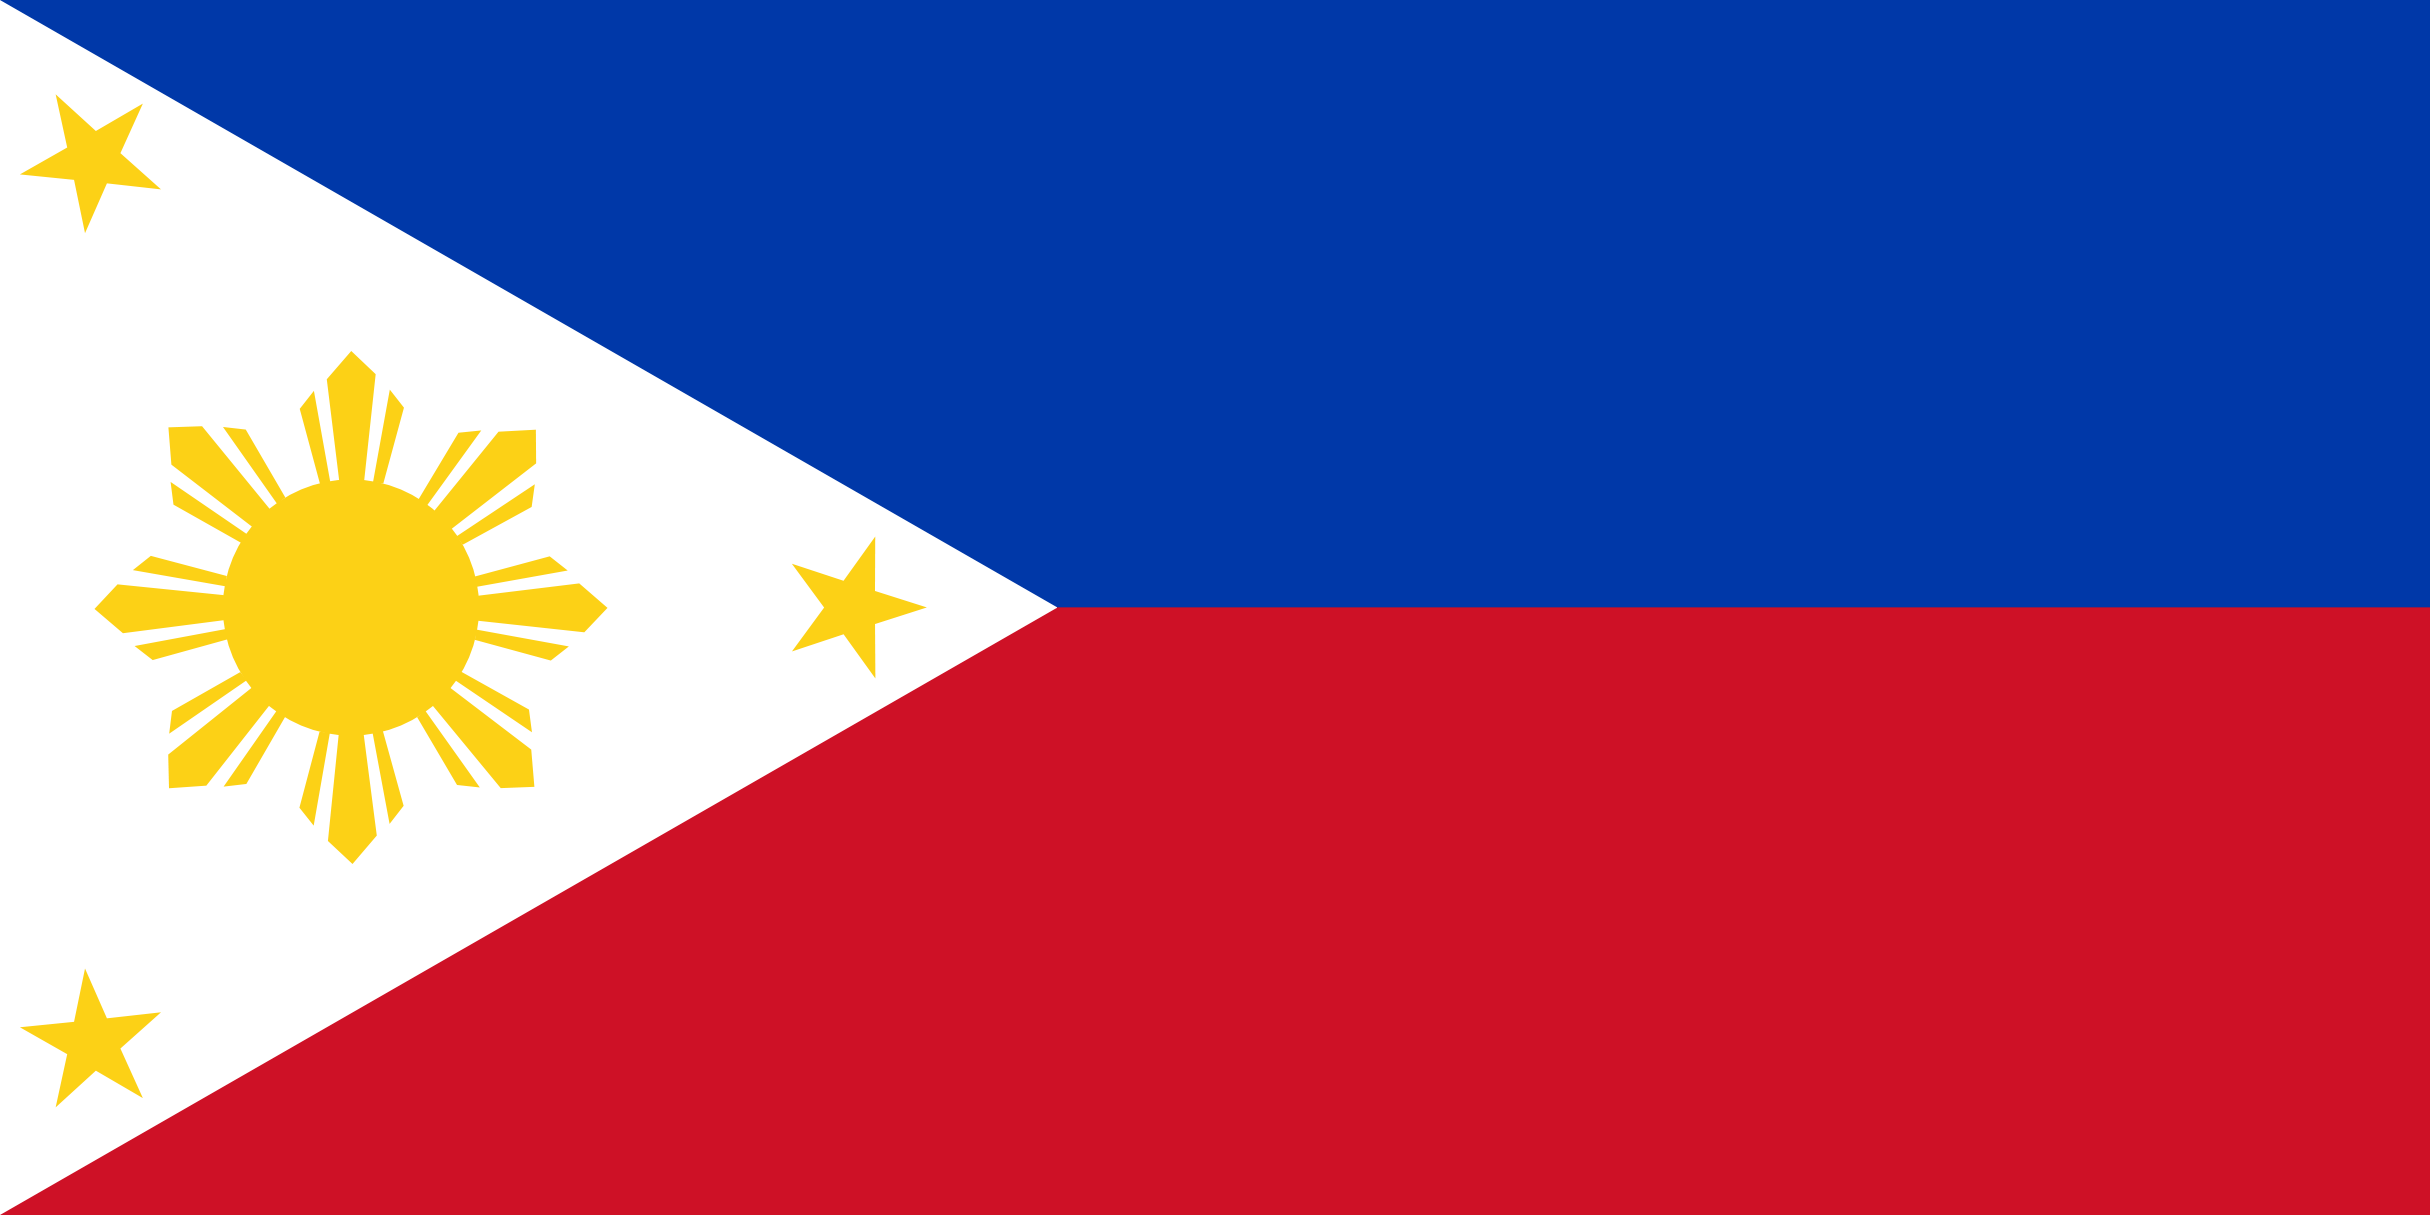 the image shows the philippine flag